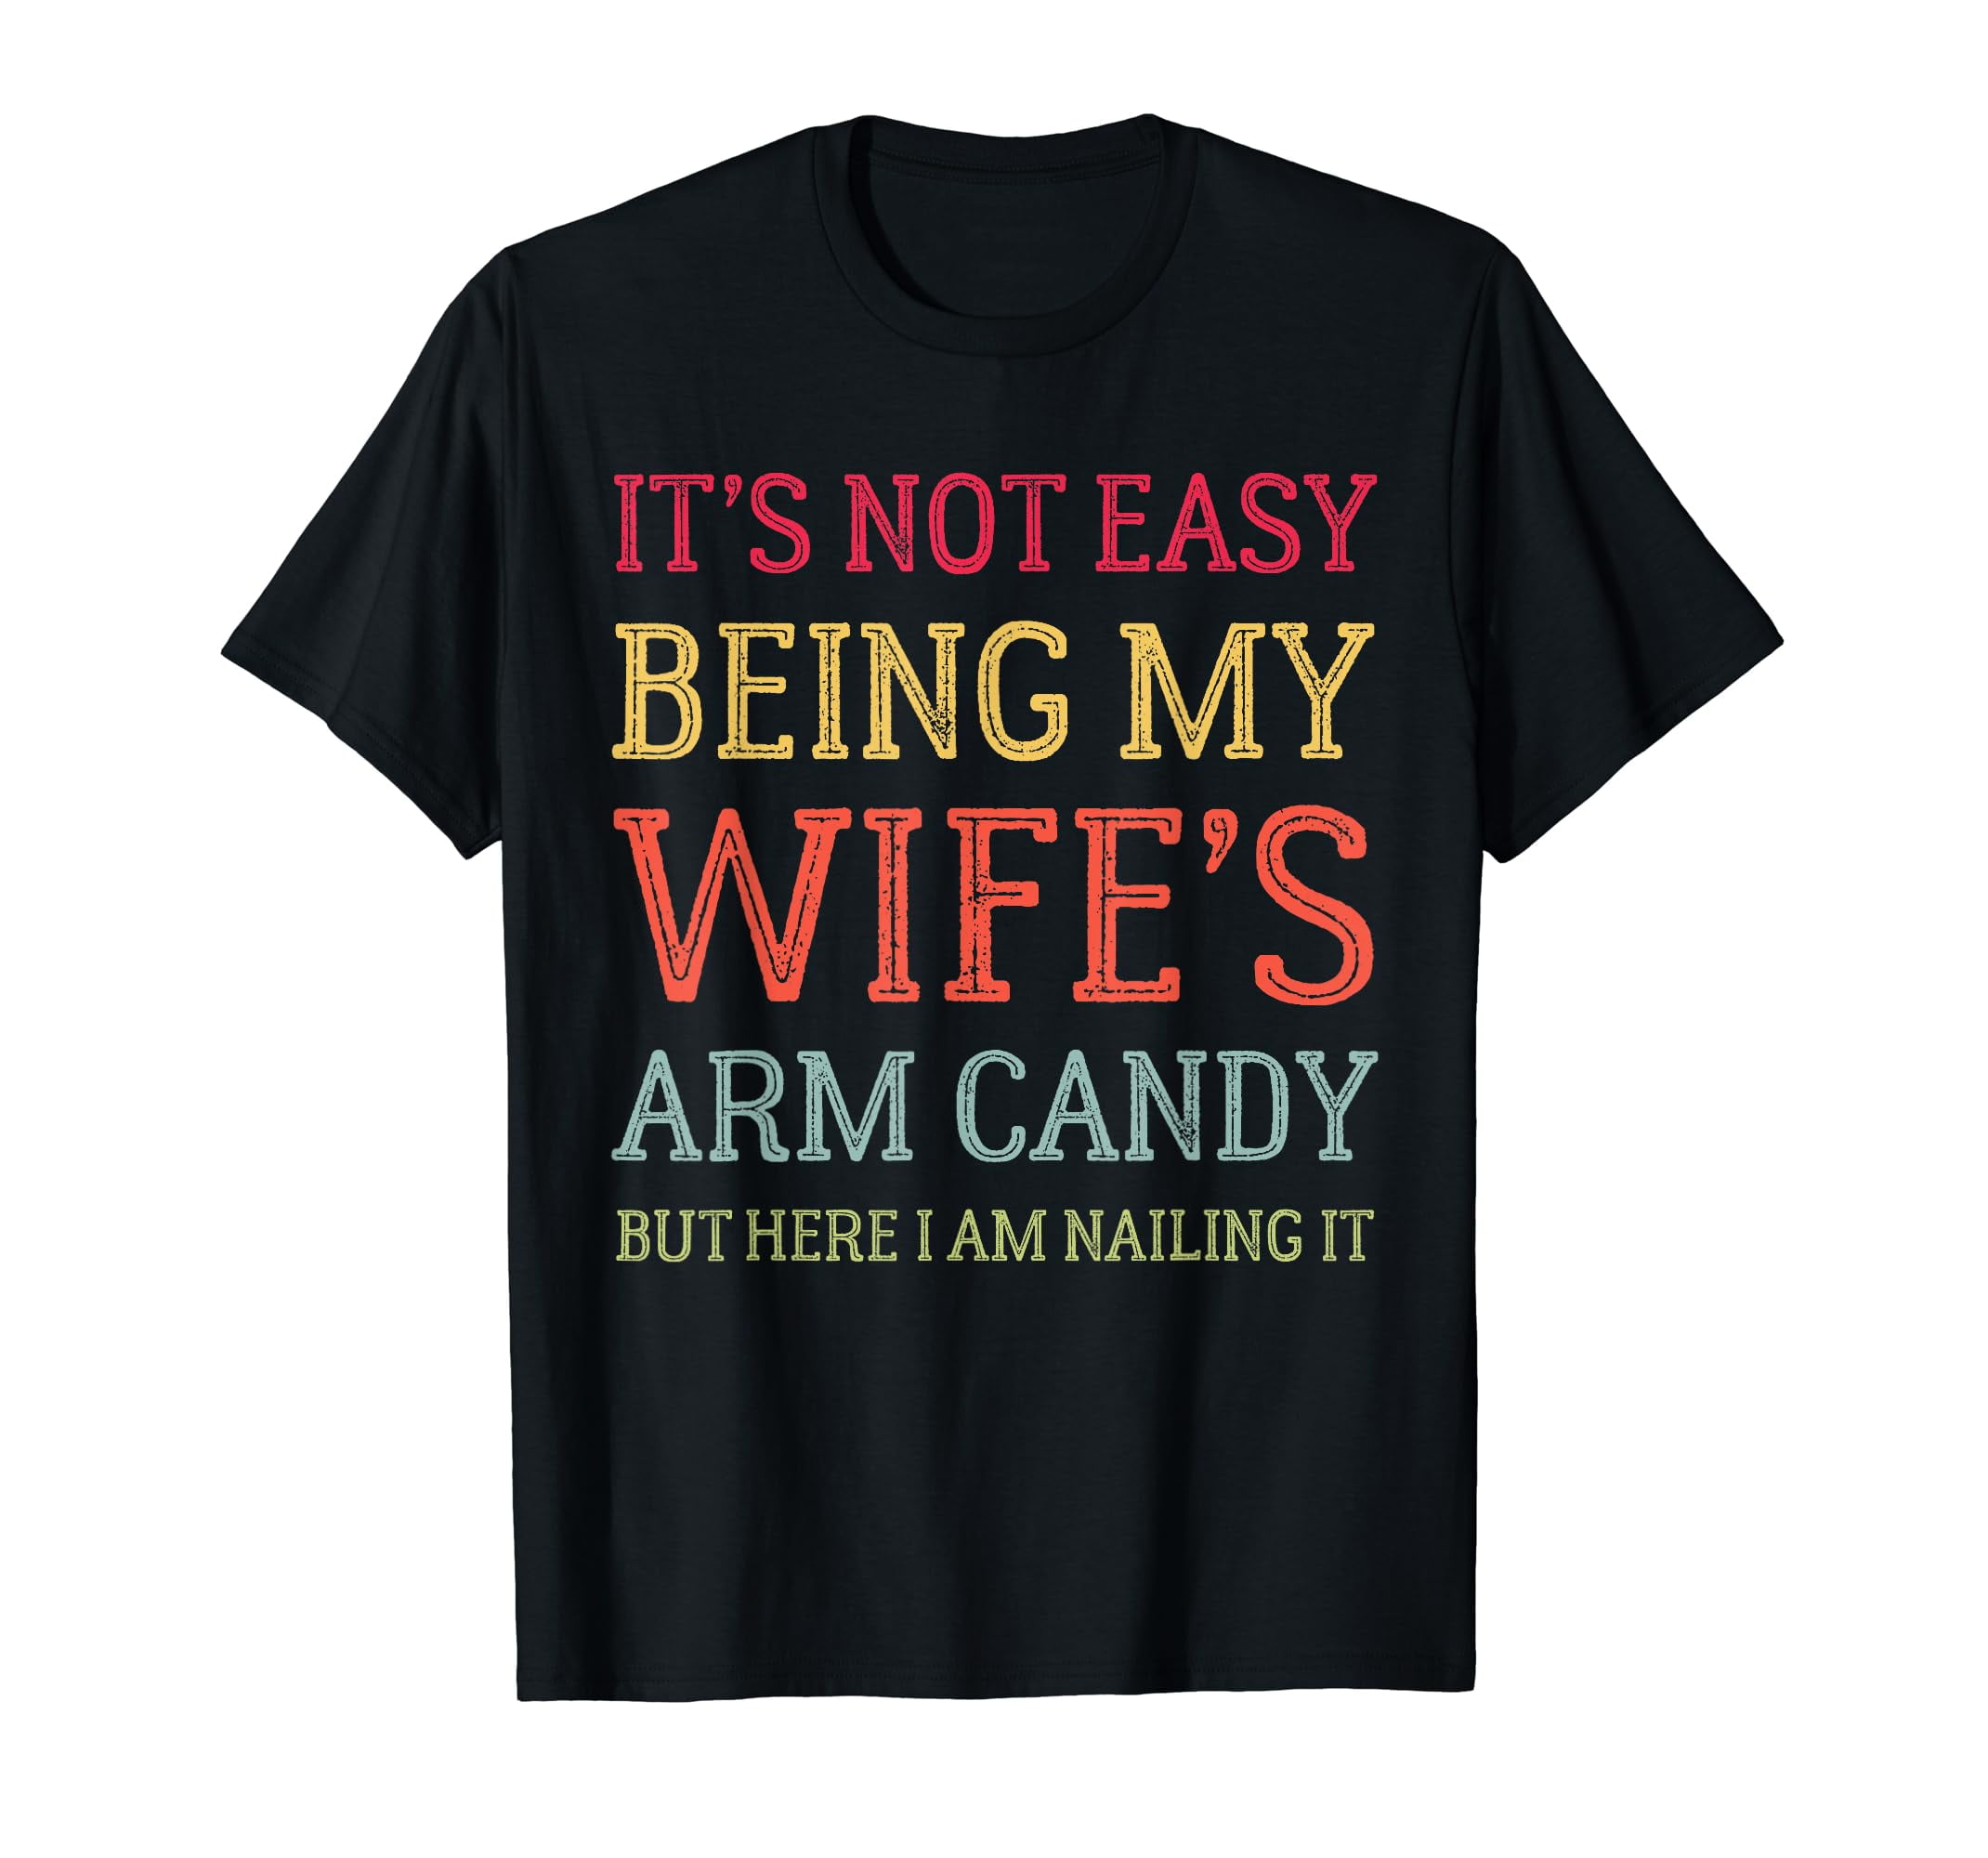 Familyloveshop LLC Couple Shirts, His and Hers, Husband Wife